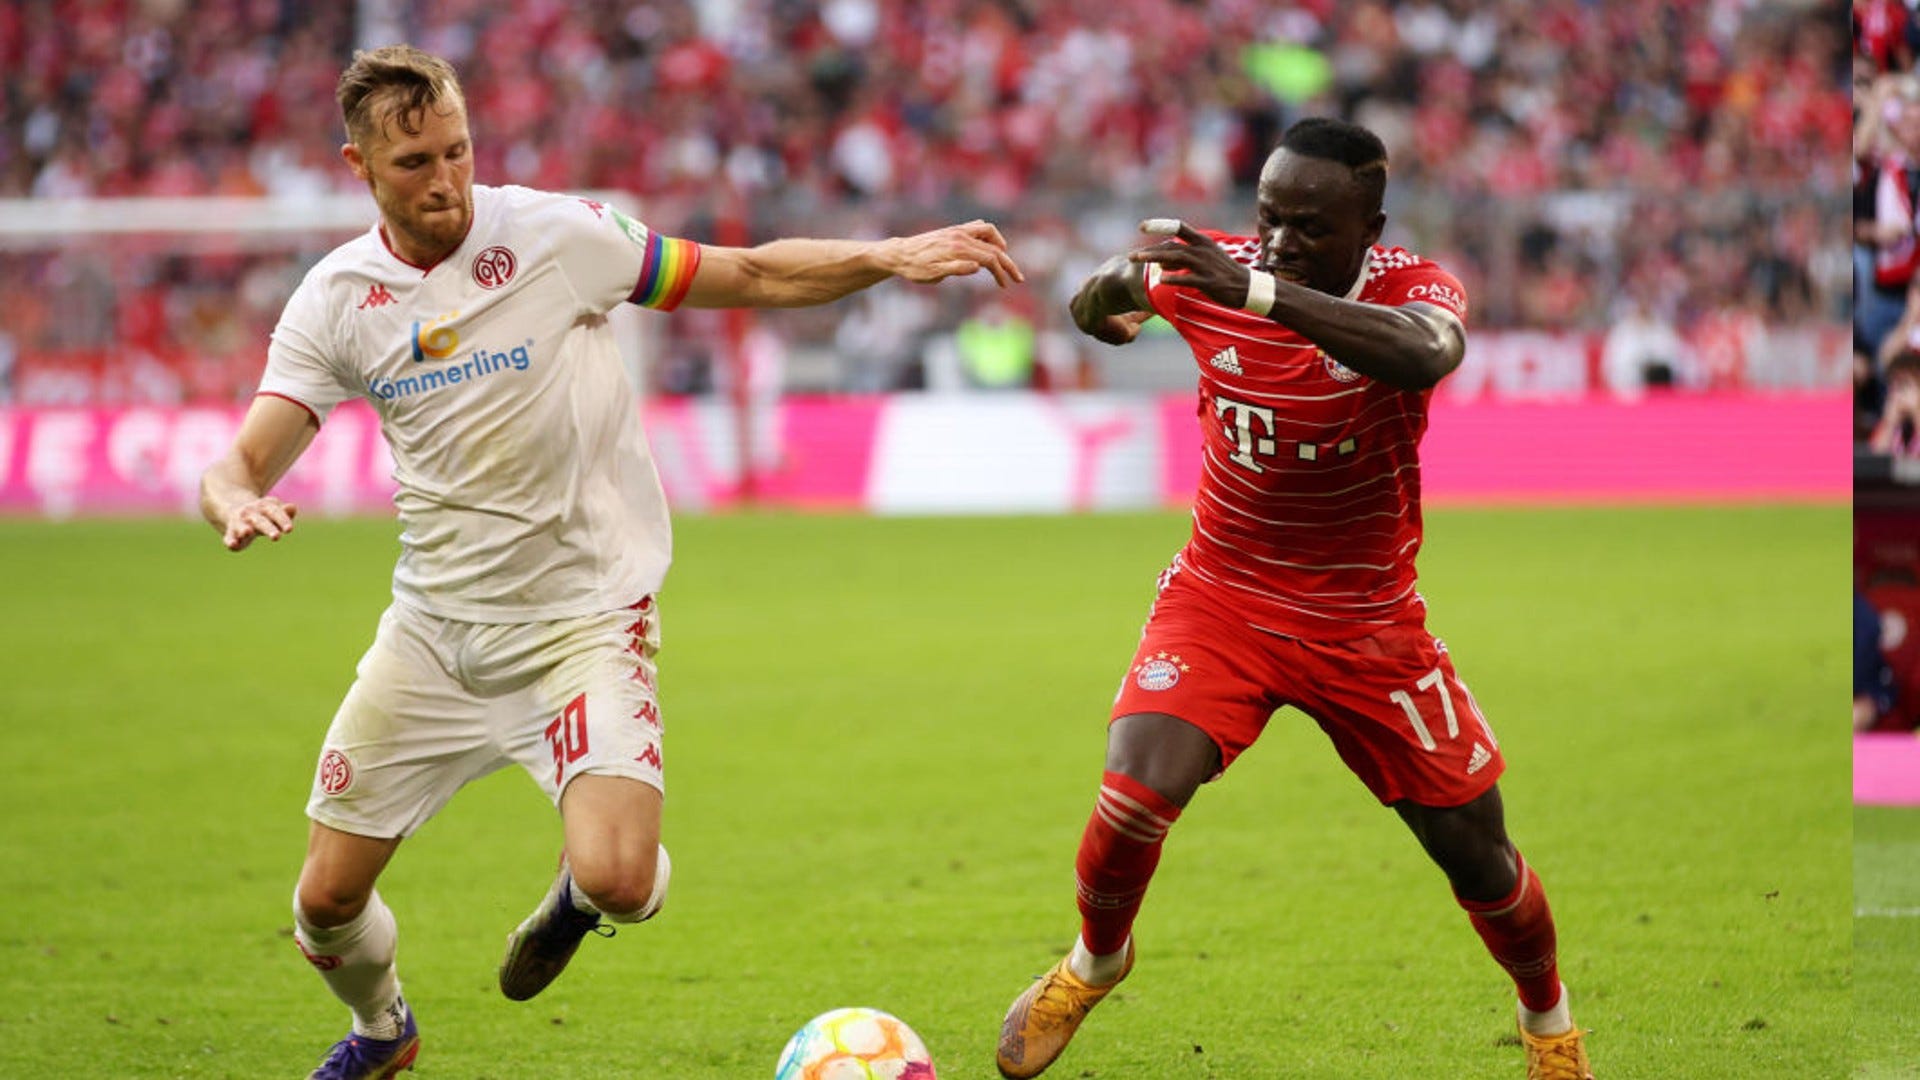 Coach exercise great happiness as Sadio Mane improved Bayern Munich's performances